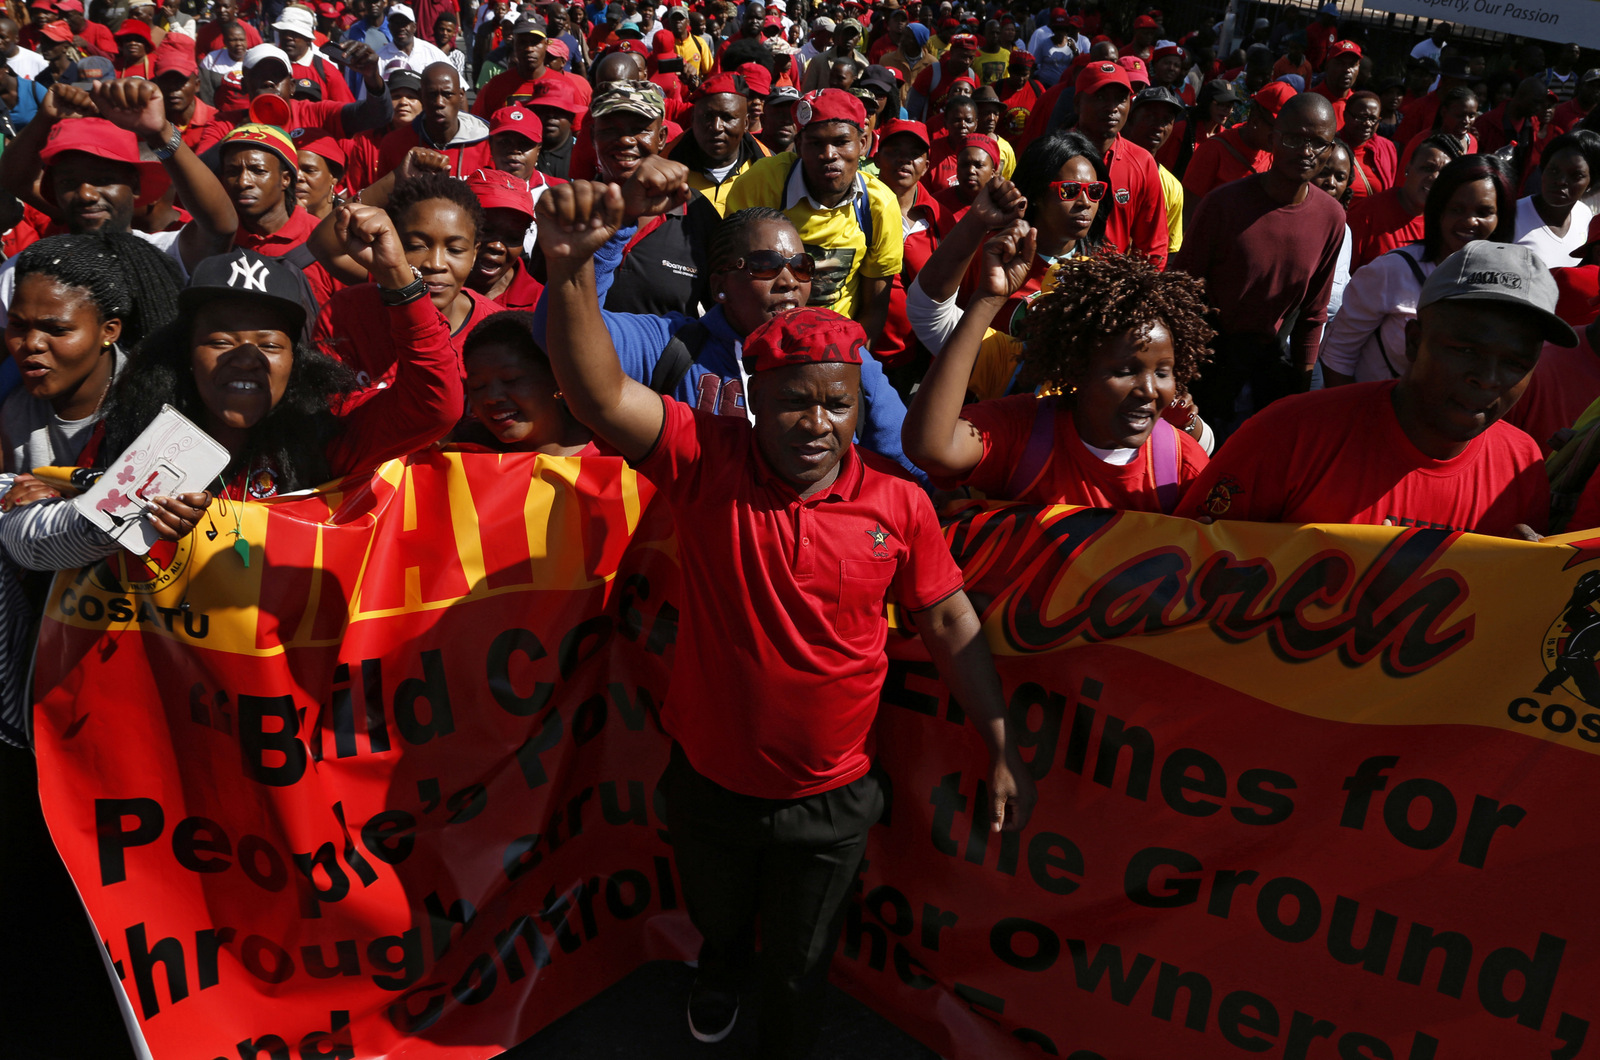 Workers take part in a May Day march to the Johannesburg Stock Exchange building on Monday, May 1, 2017. A speech by President Jacob Zuma to workers at a rally was cancelled in Bloemfontein as Zuma was heckled by some members during the gathering singing that he should step down. (AP/Denis Farrell)